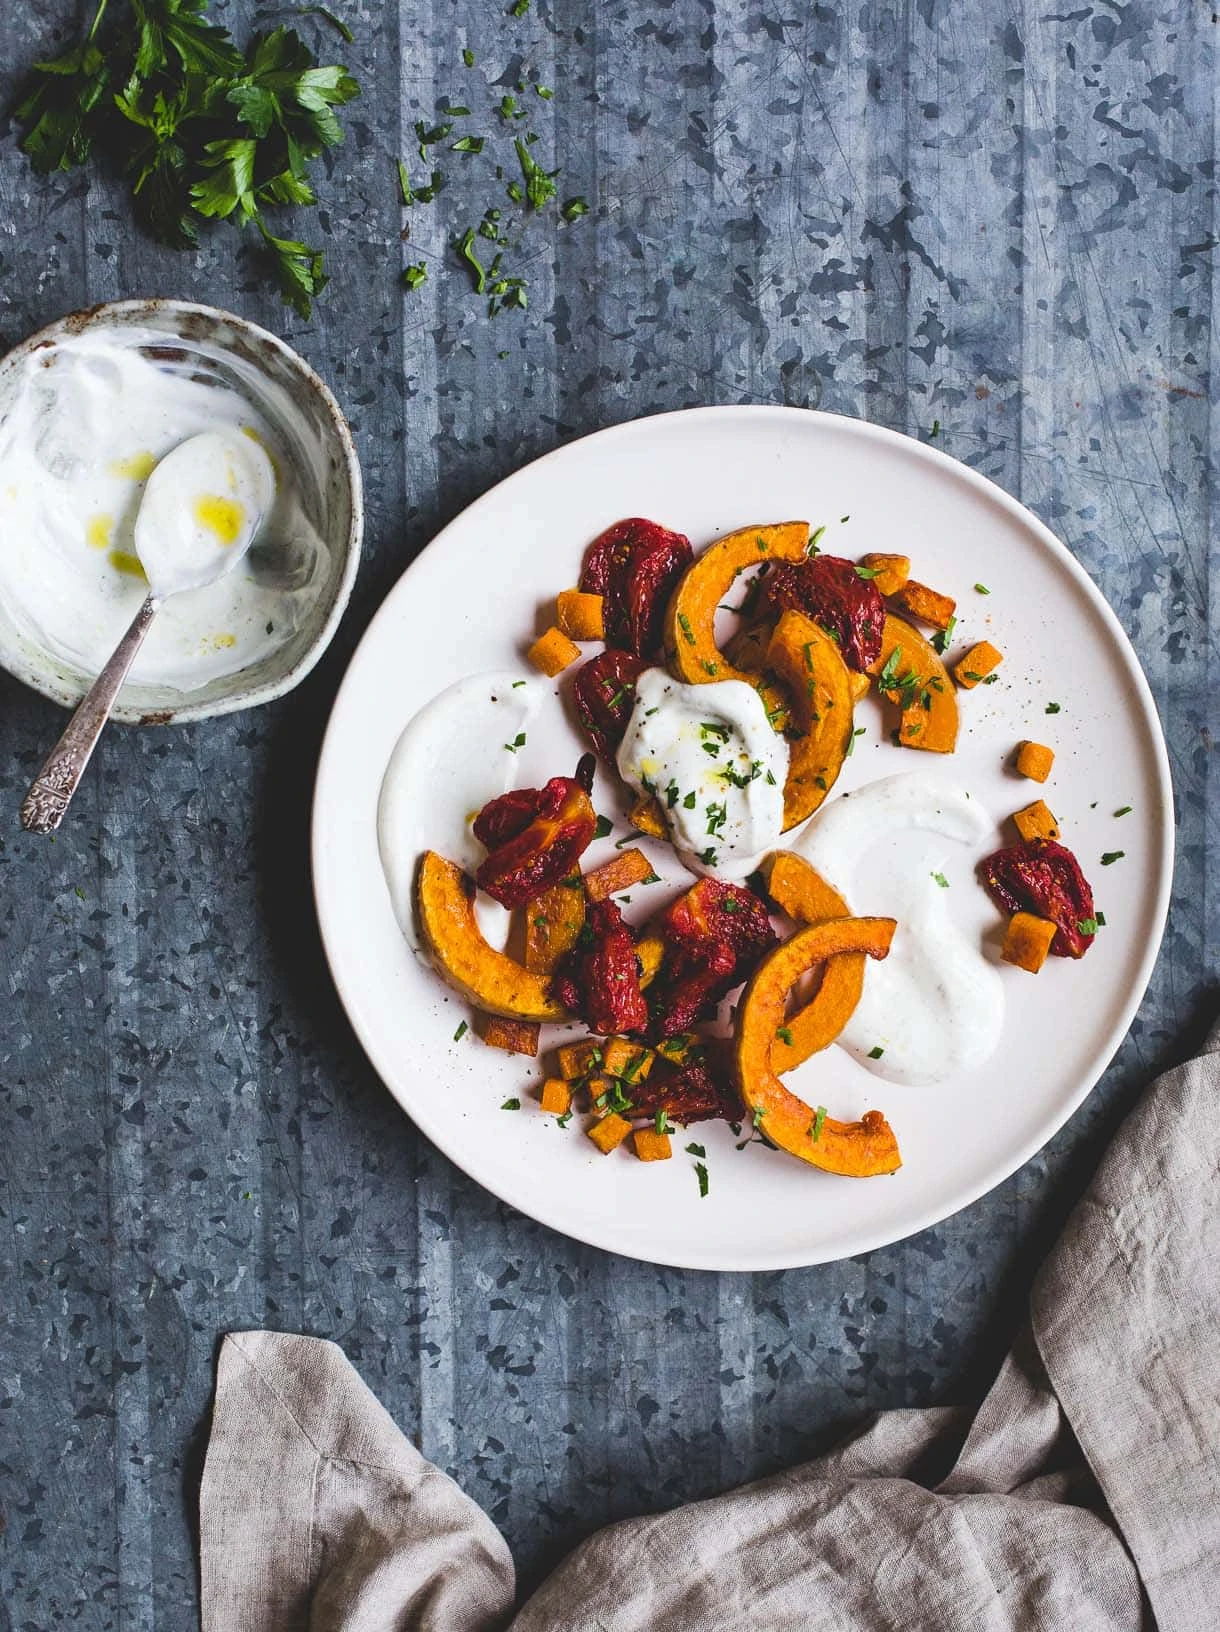 Oven Roasted Butternut Squash and Tomatoes with Cardamom Yogurt Sauce